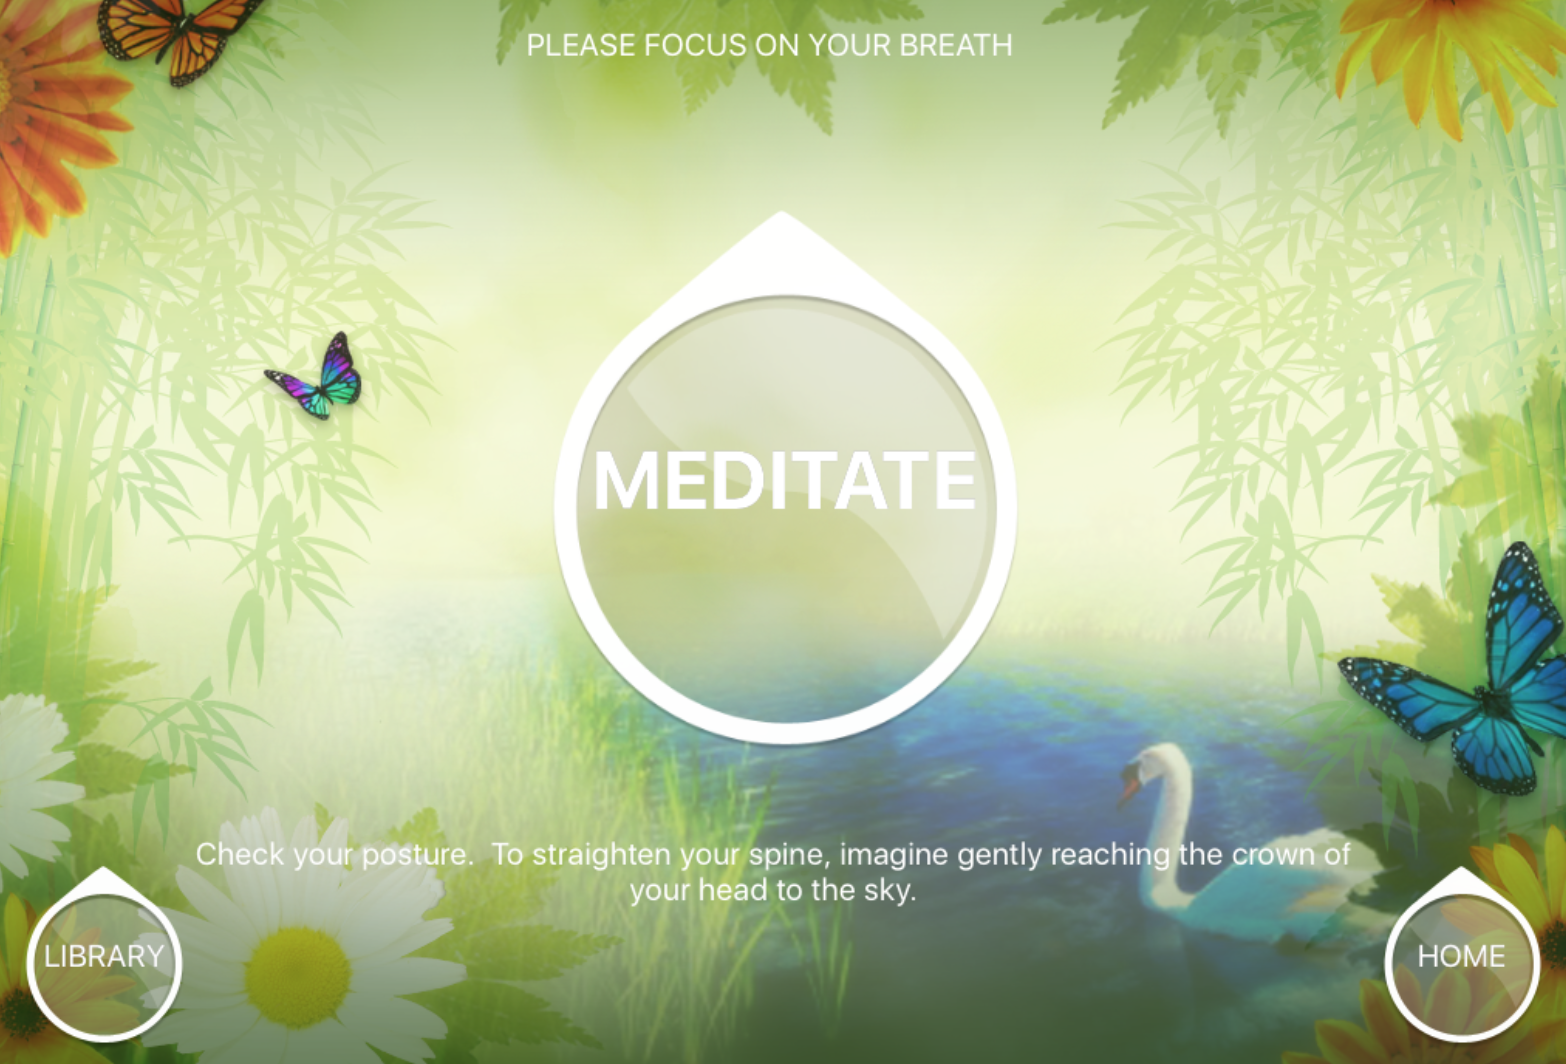 App optimizes meditation length to improve attention and memory